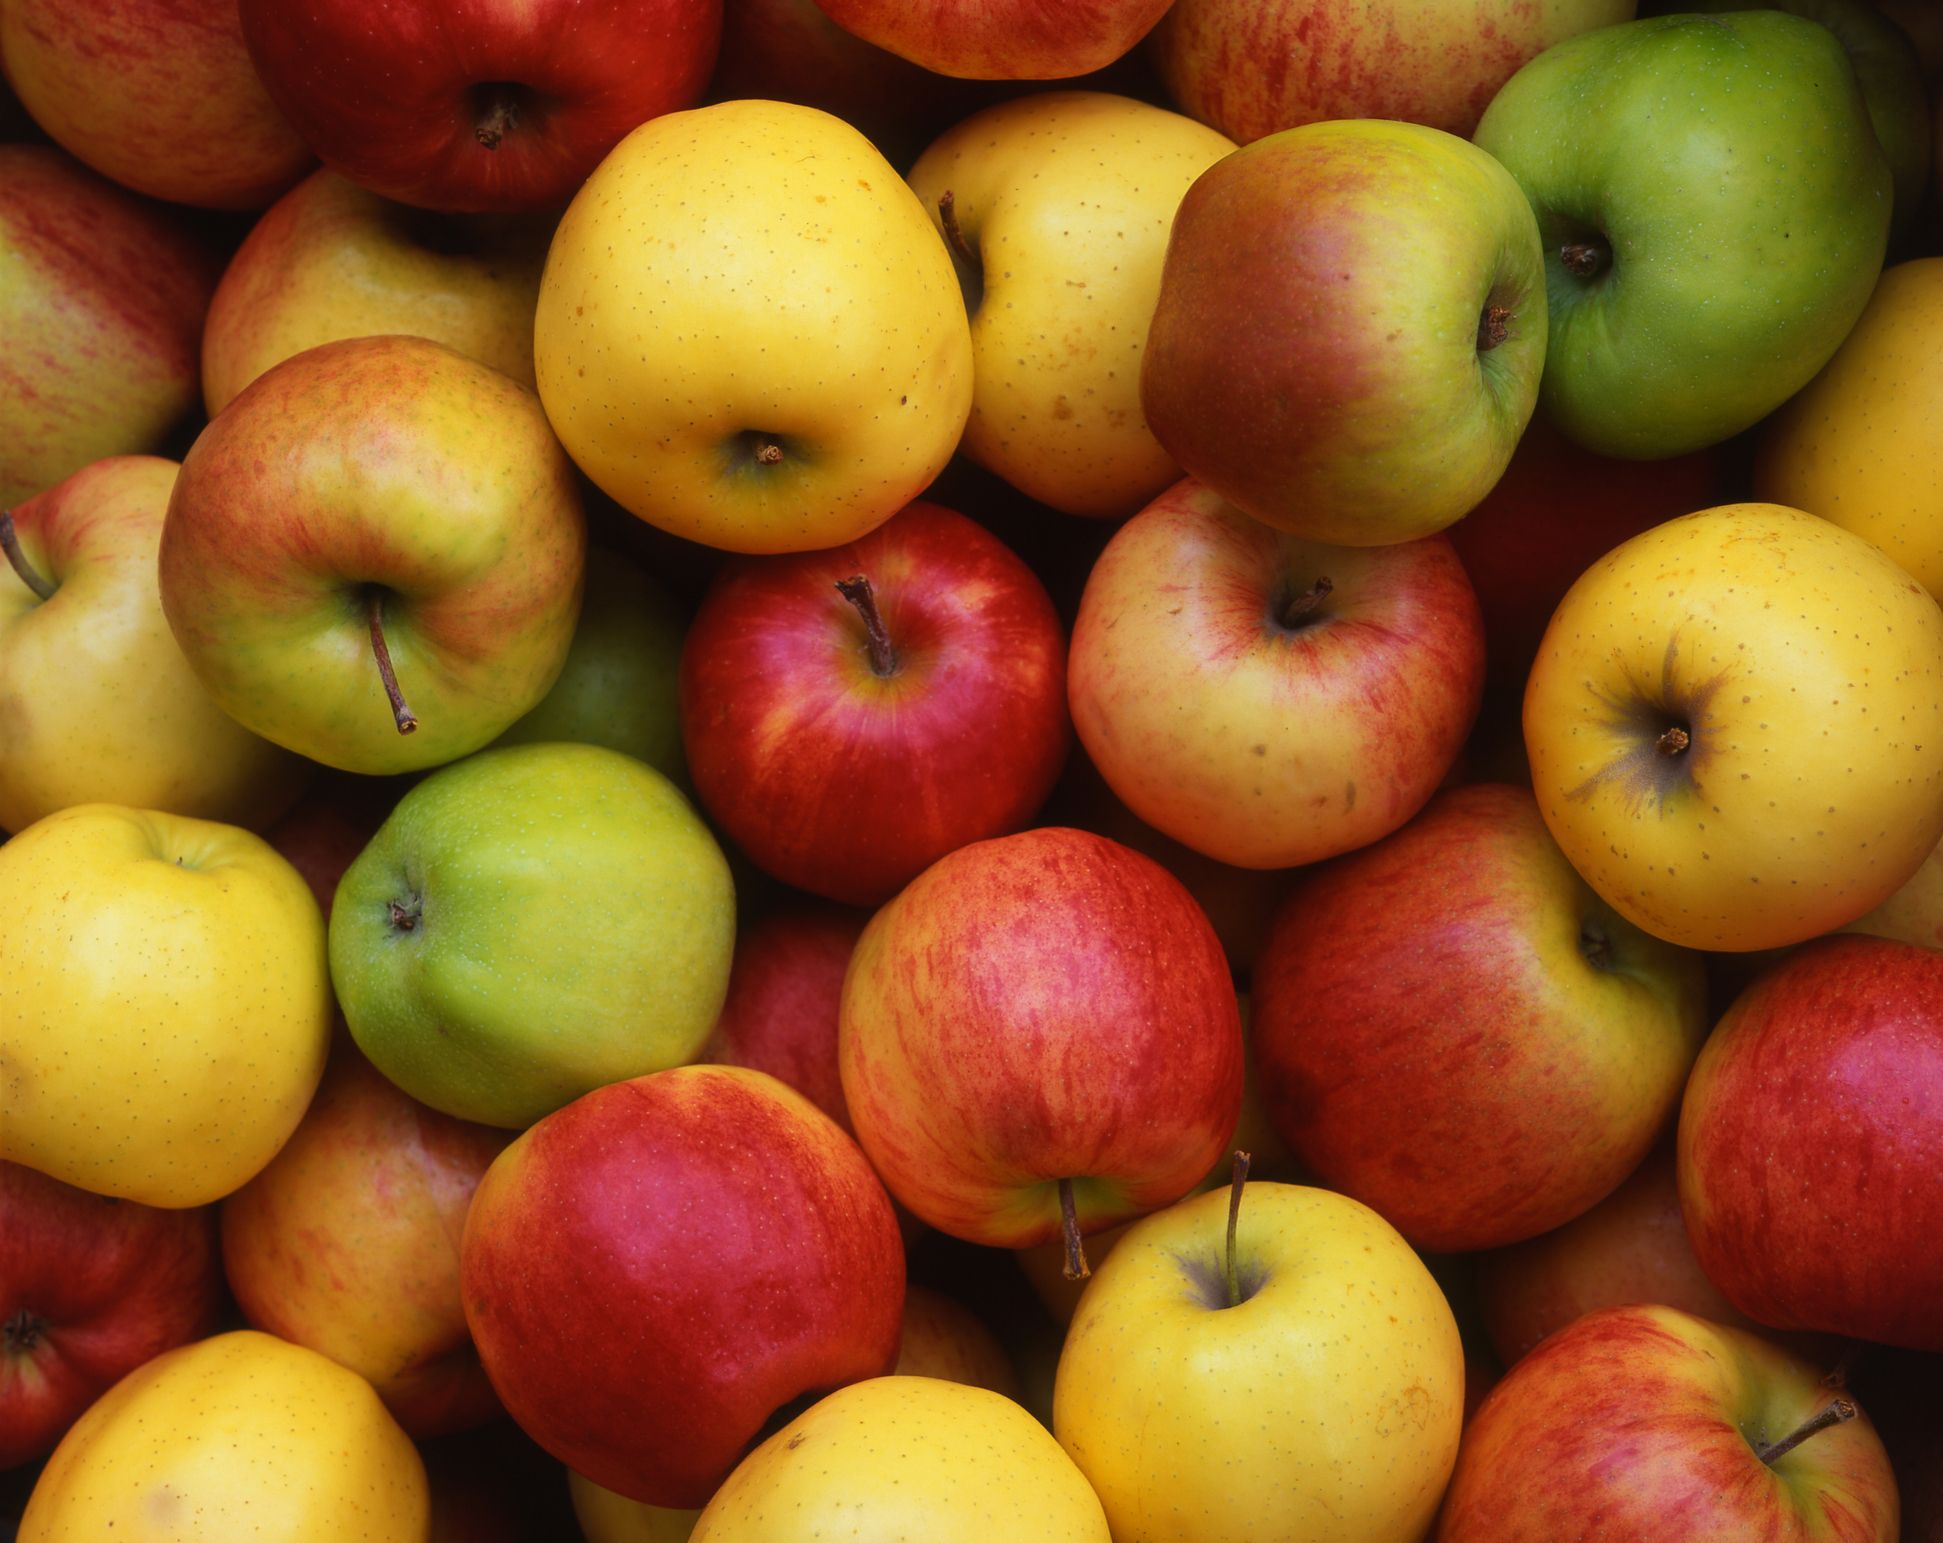 A Guide To 10 Common Apple Varieties, With Recipes